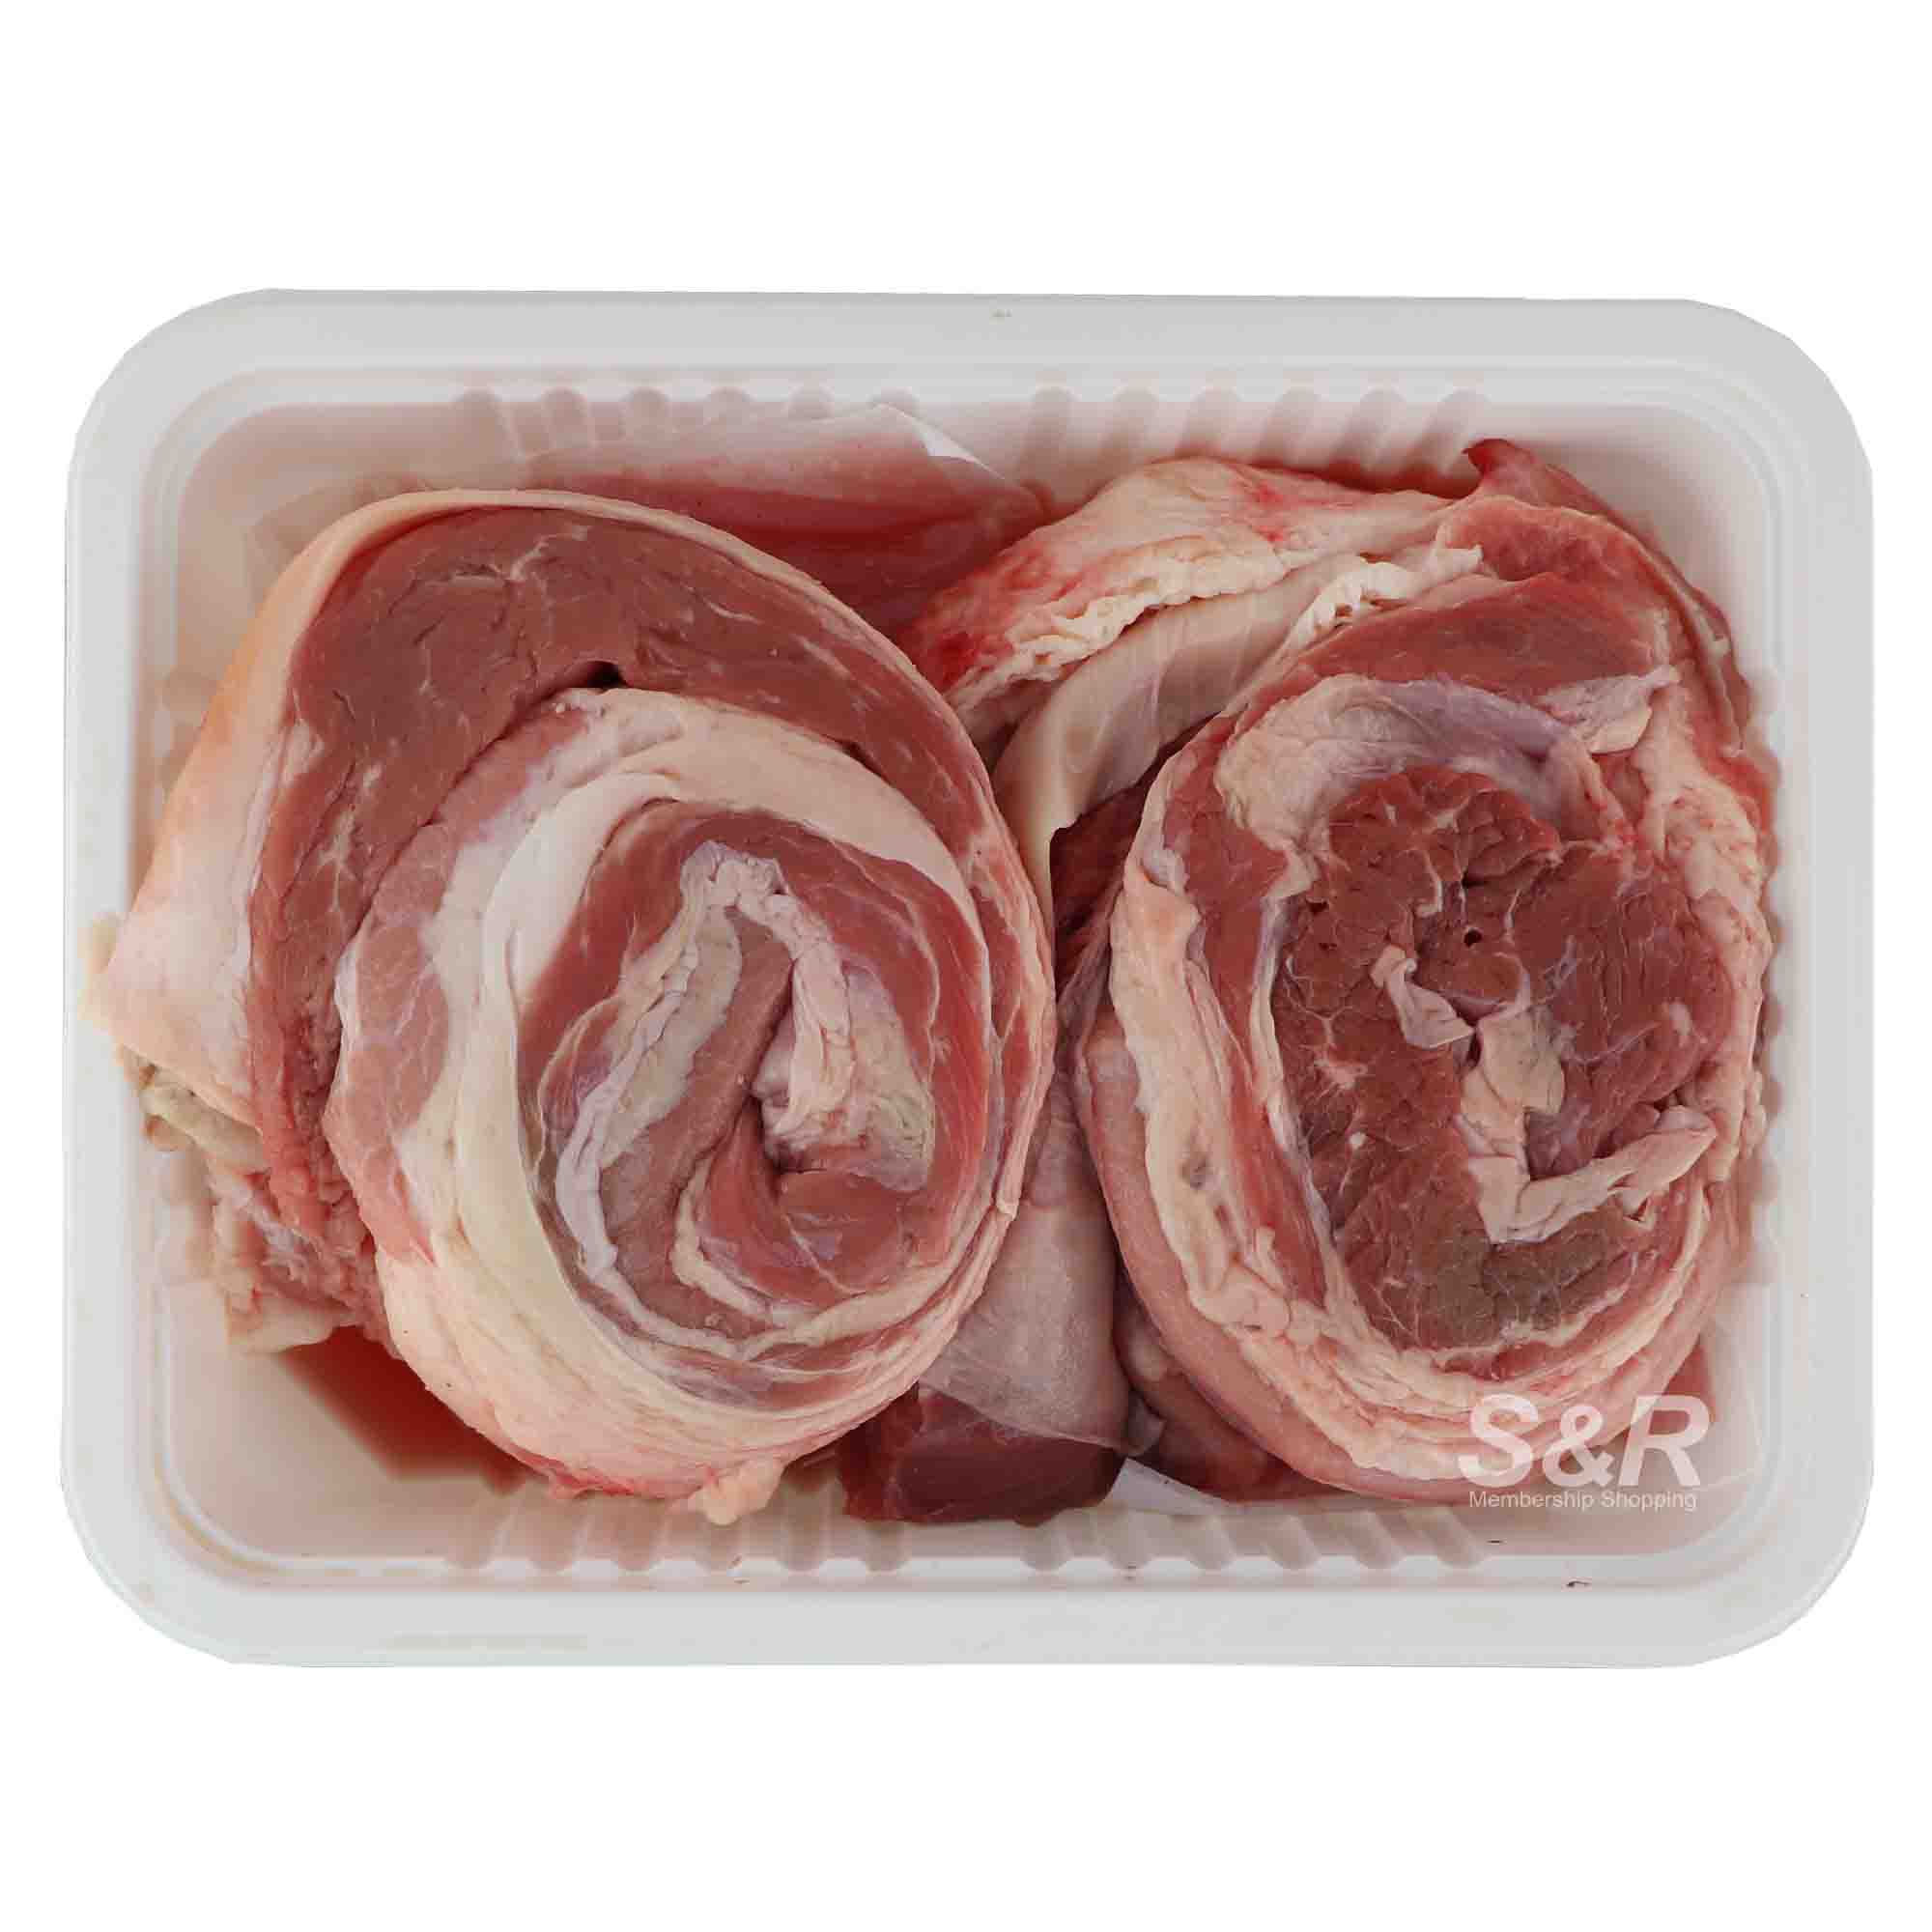 S&R Beef Camto approx. 2kg